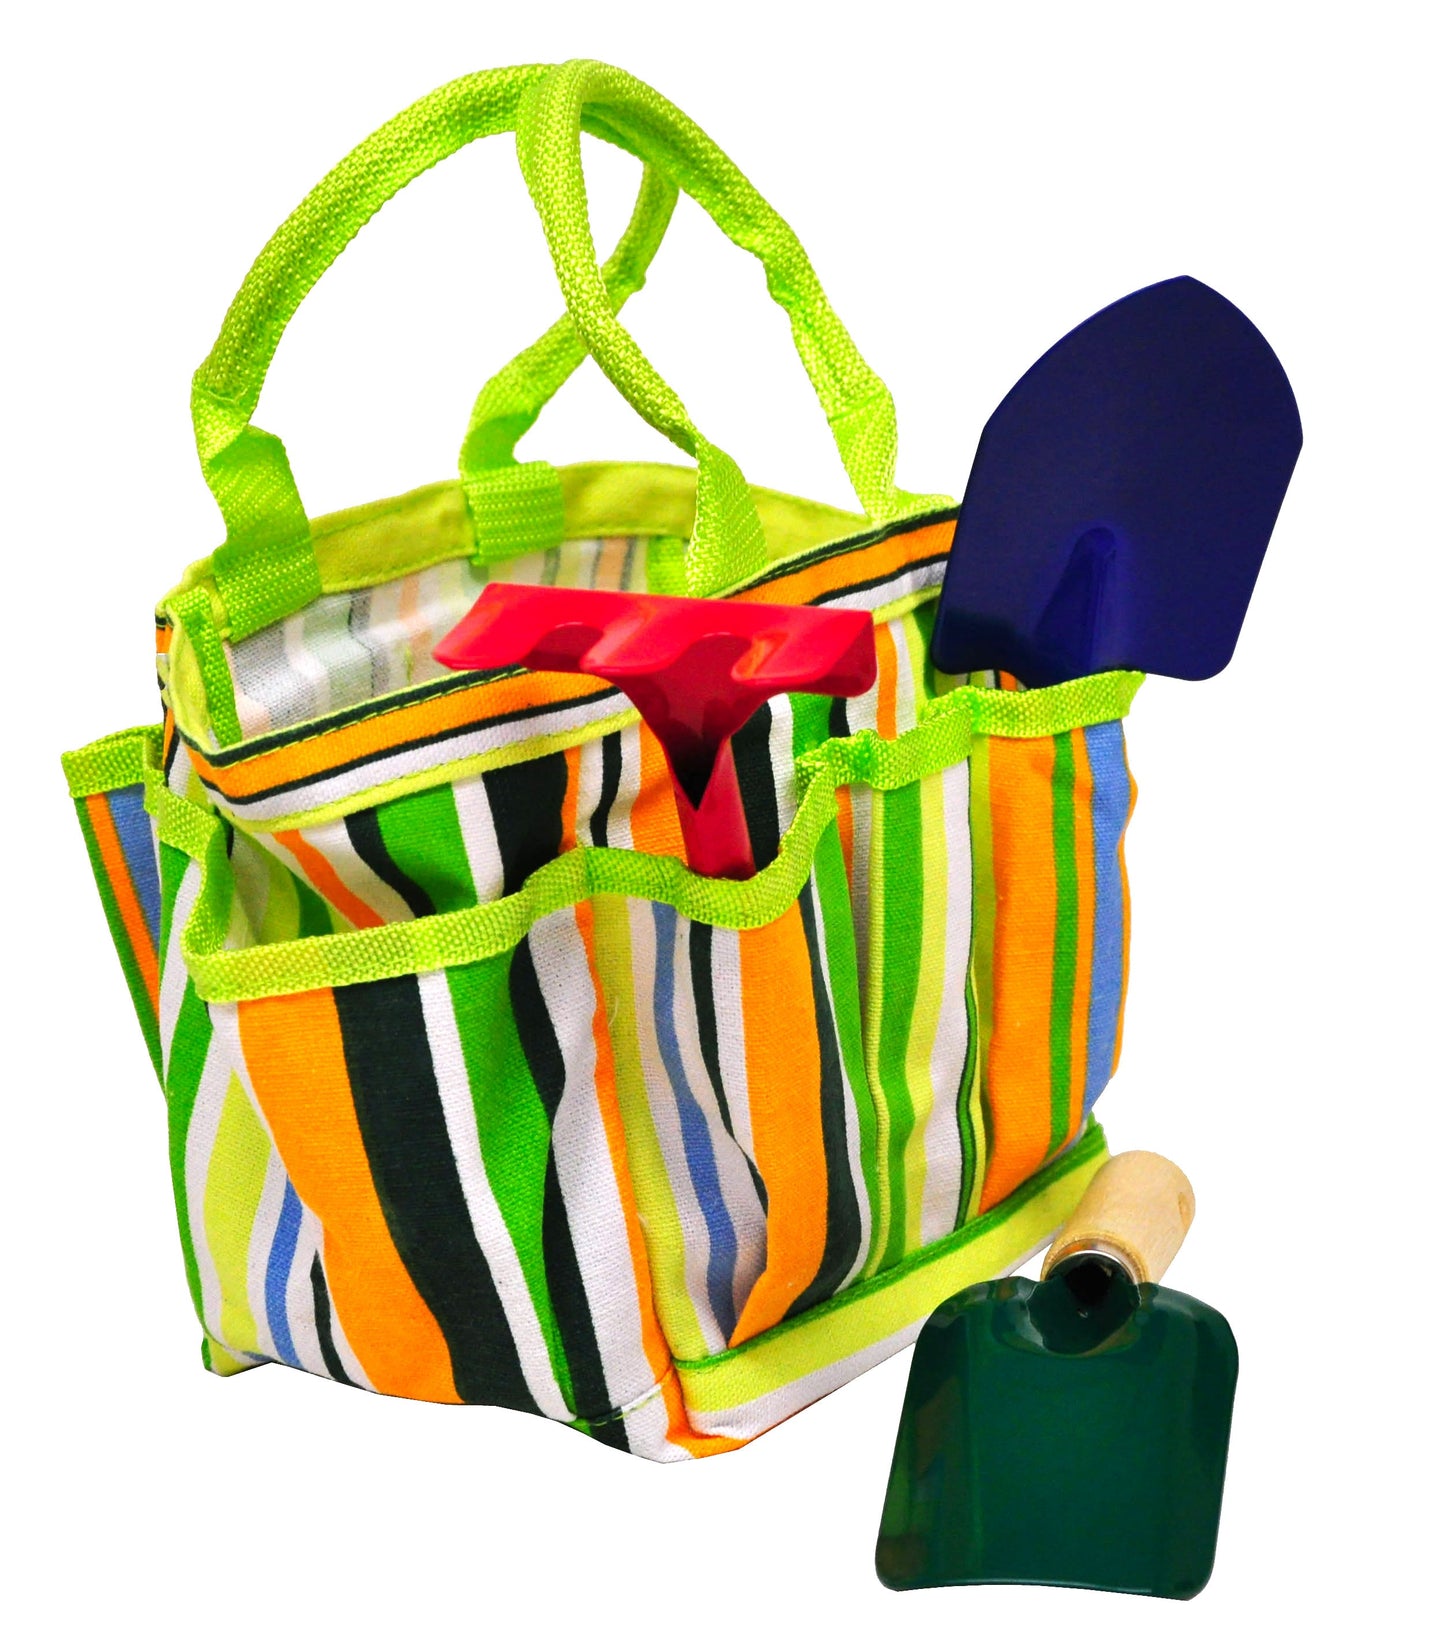 Kids Garden Tools Set with Tote